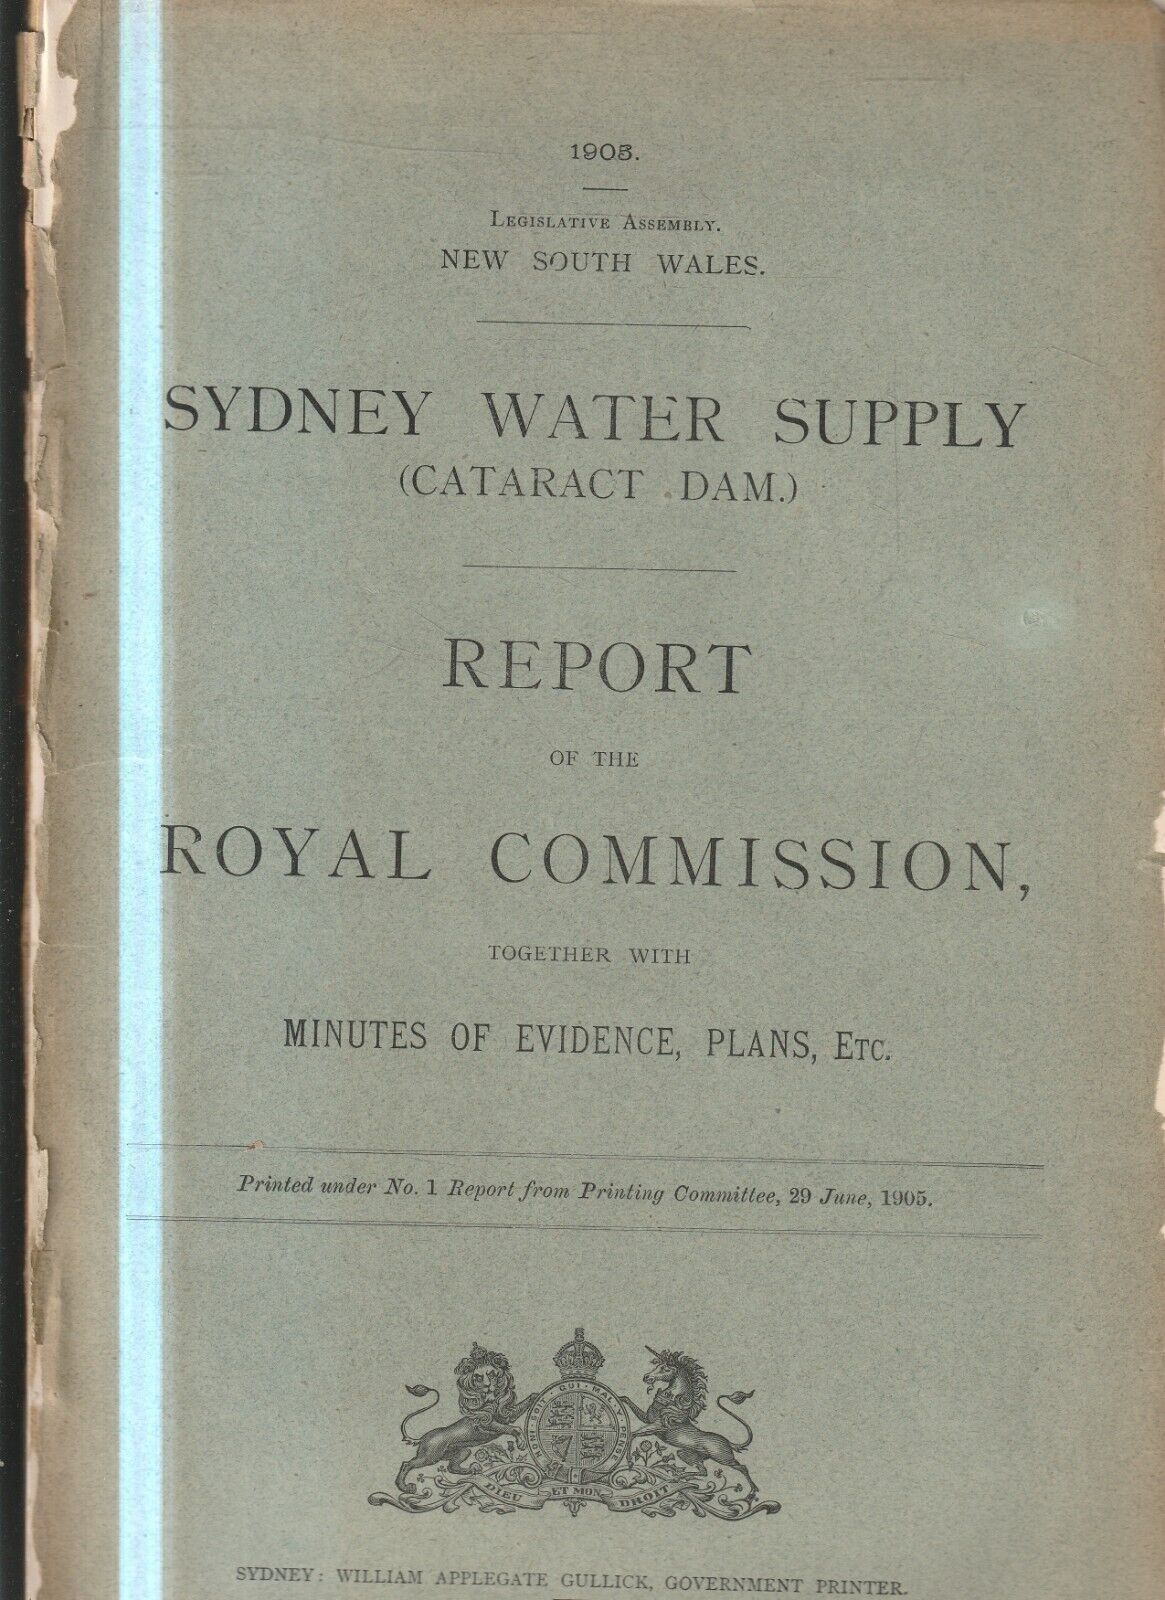 MEMORABILIA ,SYDNEY WATER SUPPLY ROYAL COMMISSION , 1905 , MINUTES OF EVIDENCE